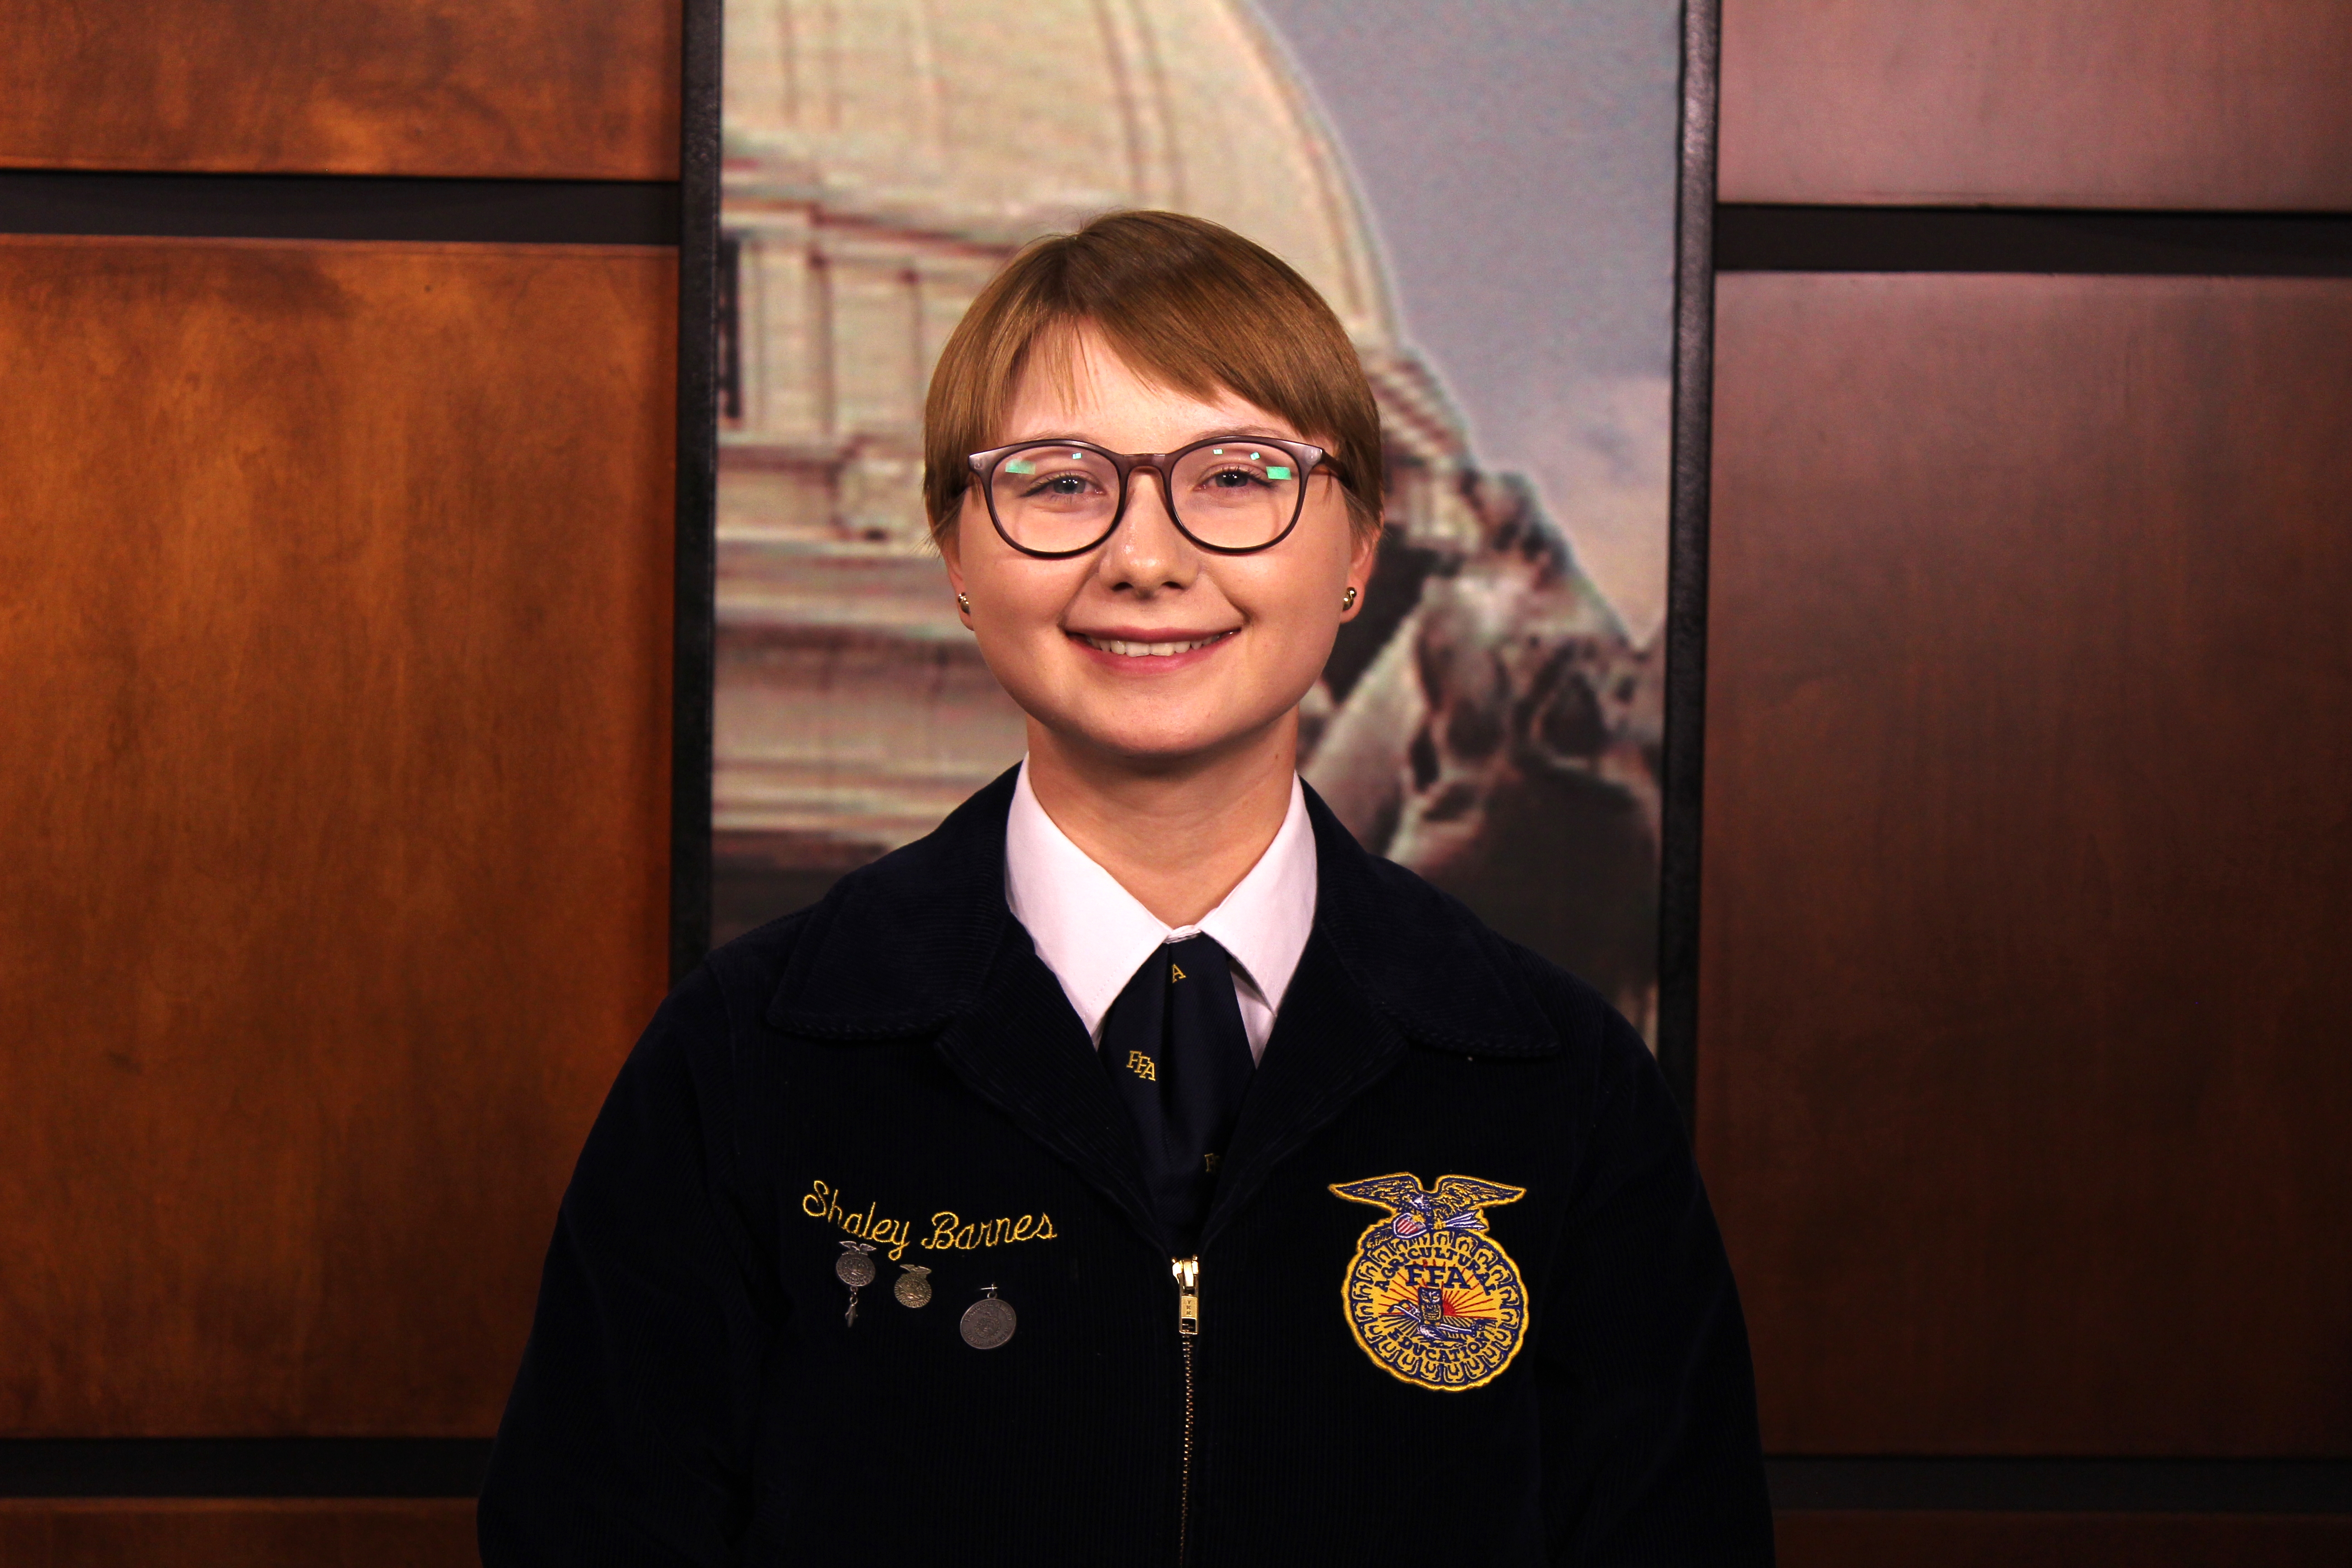 Introducing Shaley Barnes of the Wellston FFA Chapter, Your 2022 Central Area Star in Agribusiness